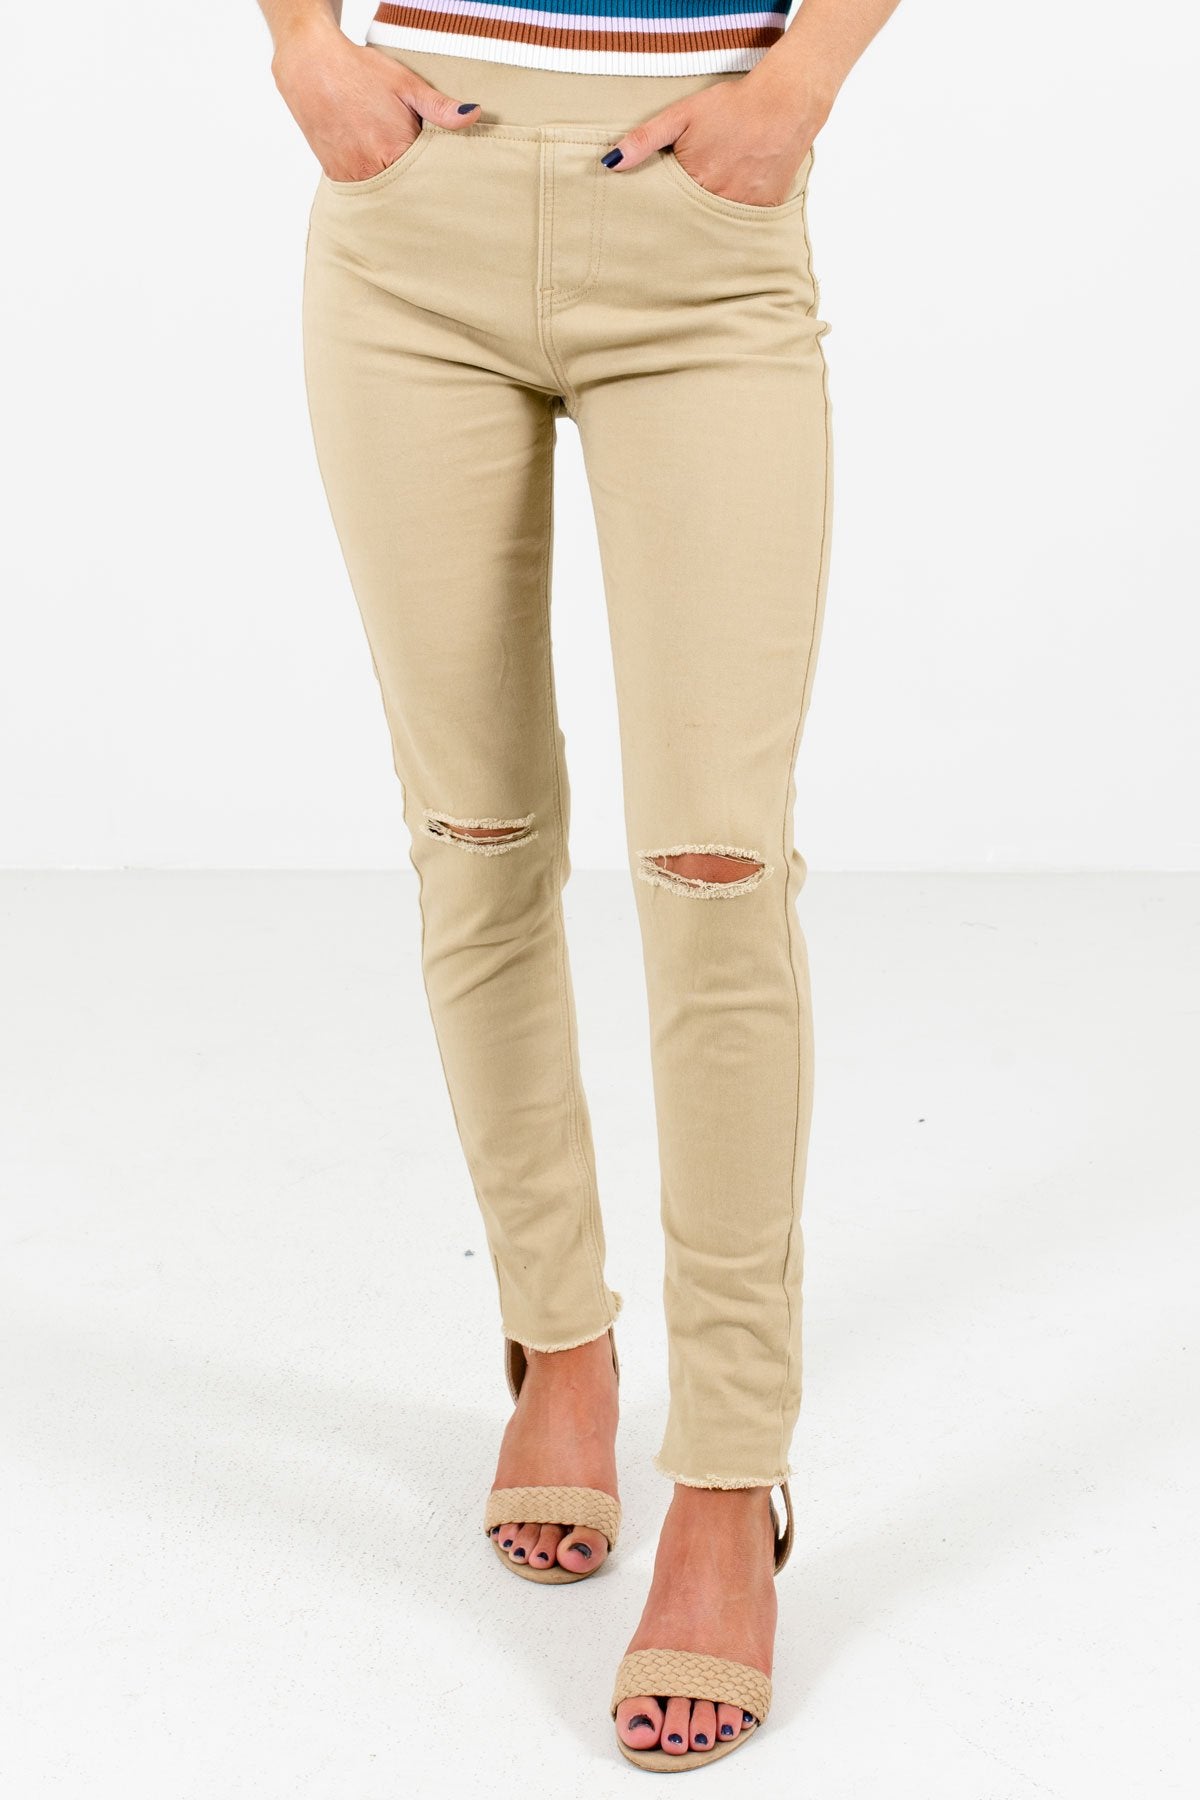 Khaki Brown Skinny Fit Boutique Jeggings for Women